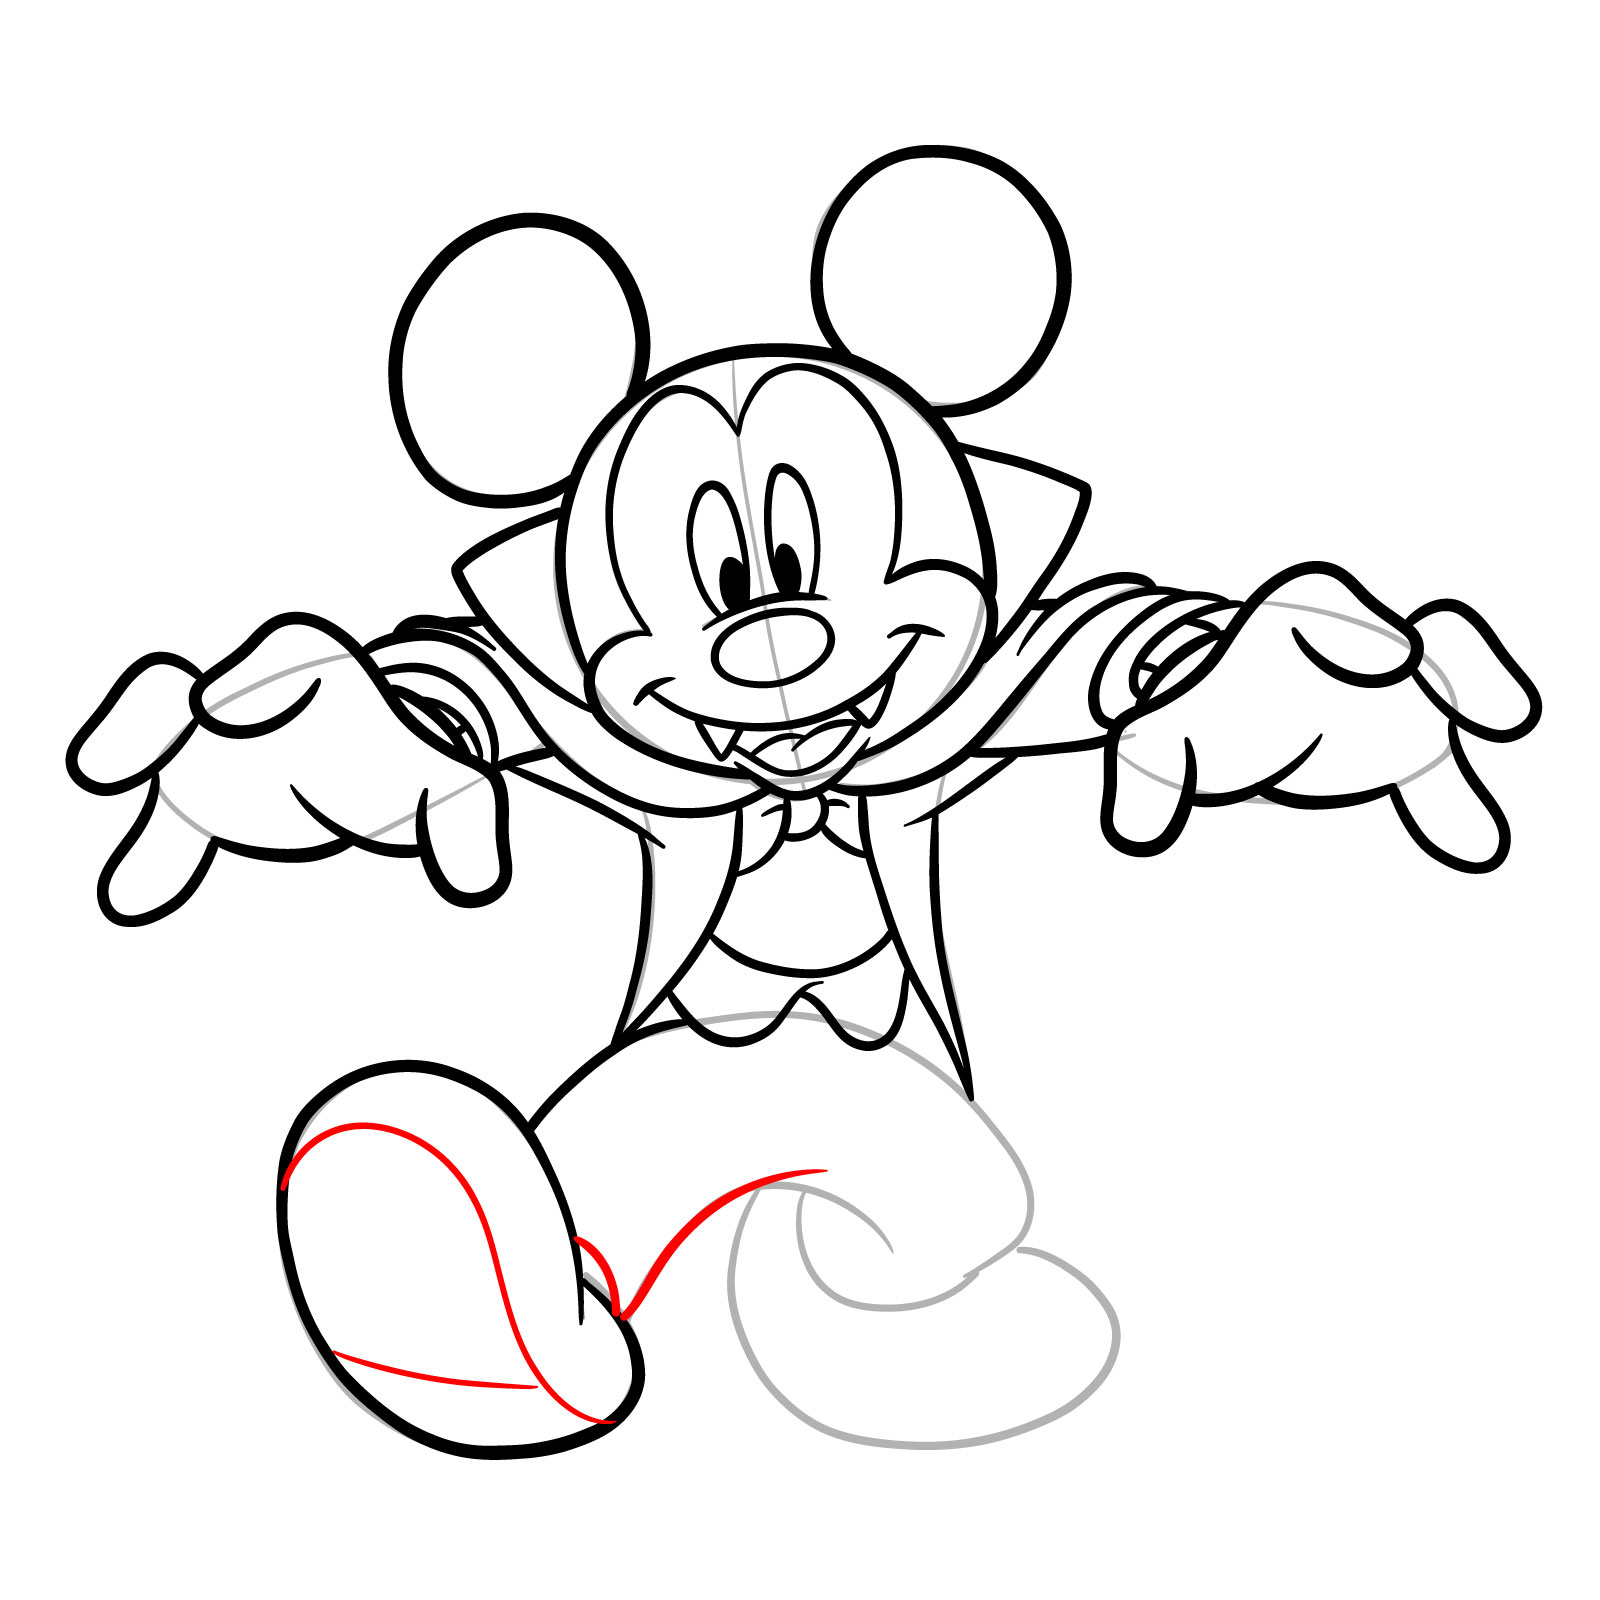 How to draw Dracula Mickey Mouse - step 22